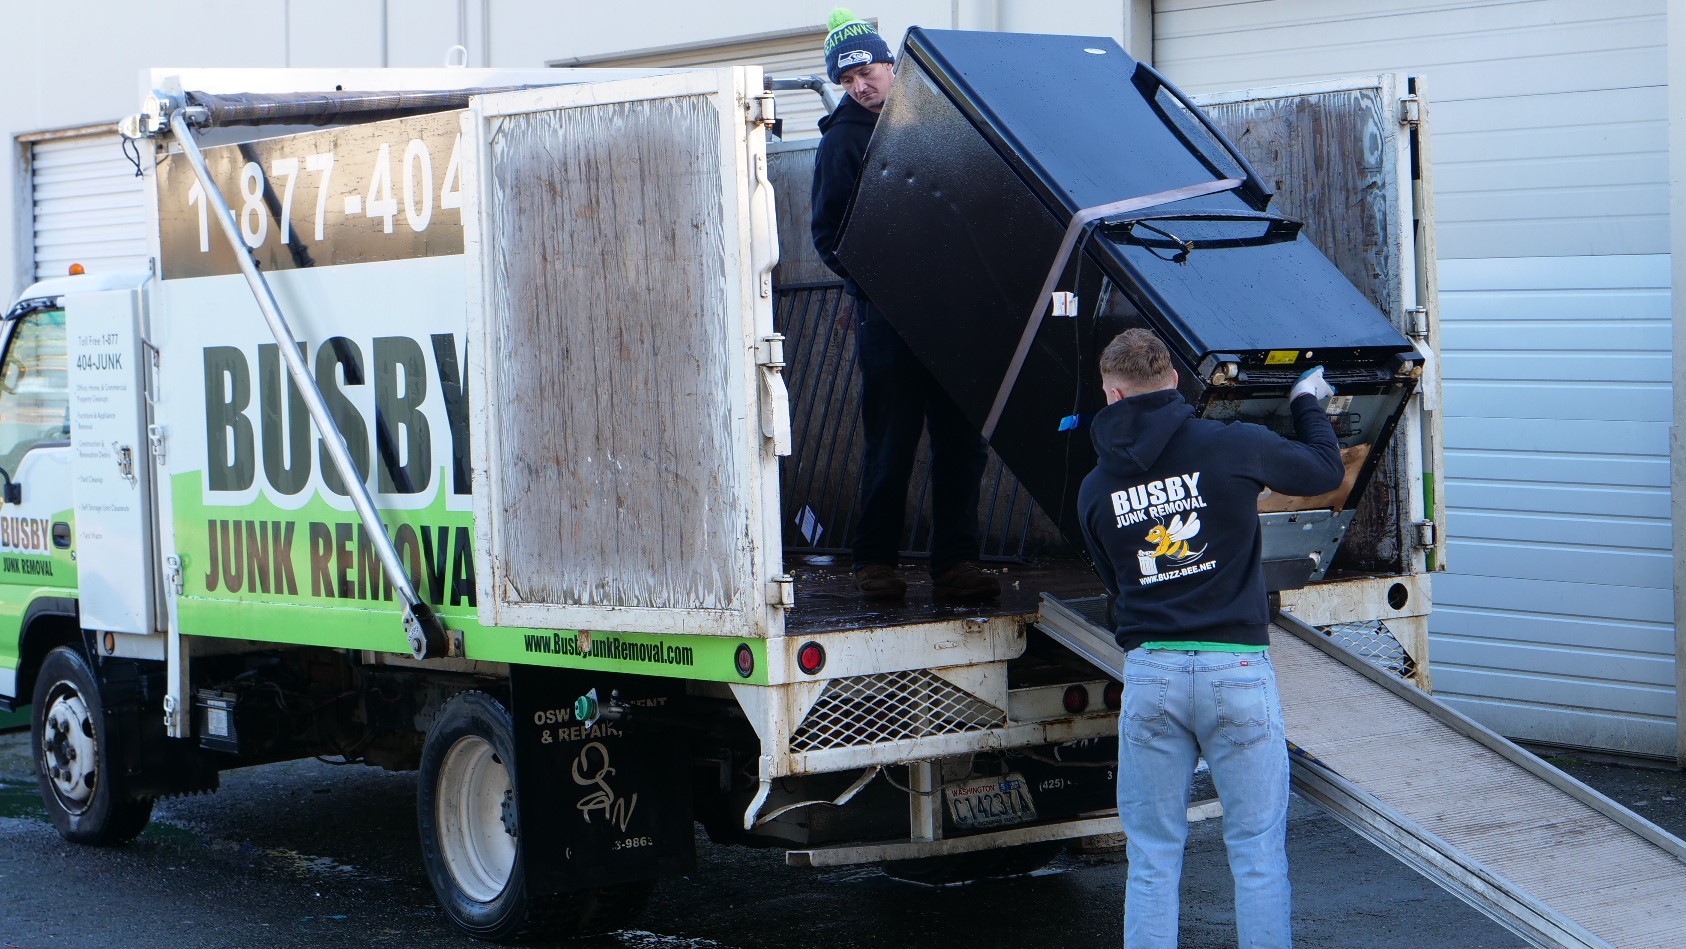 Professional team from Busby Junk Removal efficiently removing an old refrigerator from a residential home. The image shows two uniformed workers, wearing safety gloves and boots, carefully maneuvering the large appliance through a spacious, well-lit kitchen. The refrigerator is being carried with the aid of a sturdy dolly, ensuring safe and damage-free removal. In the background, there are clean, empty countertops and a glimpse of the open front door, indicating the pathway for removal. The scene conveys the company's commitment to professionalism, safety, and customer satisfaction in household appliance removal services